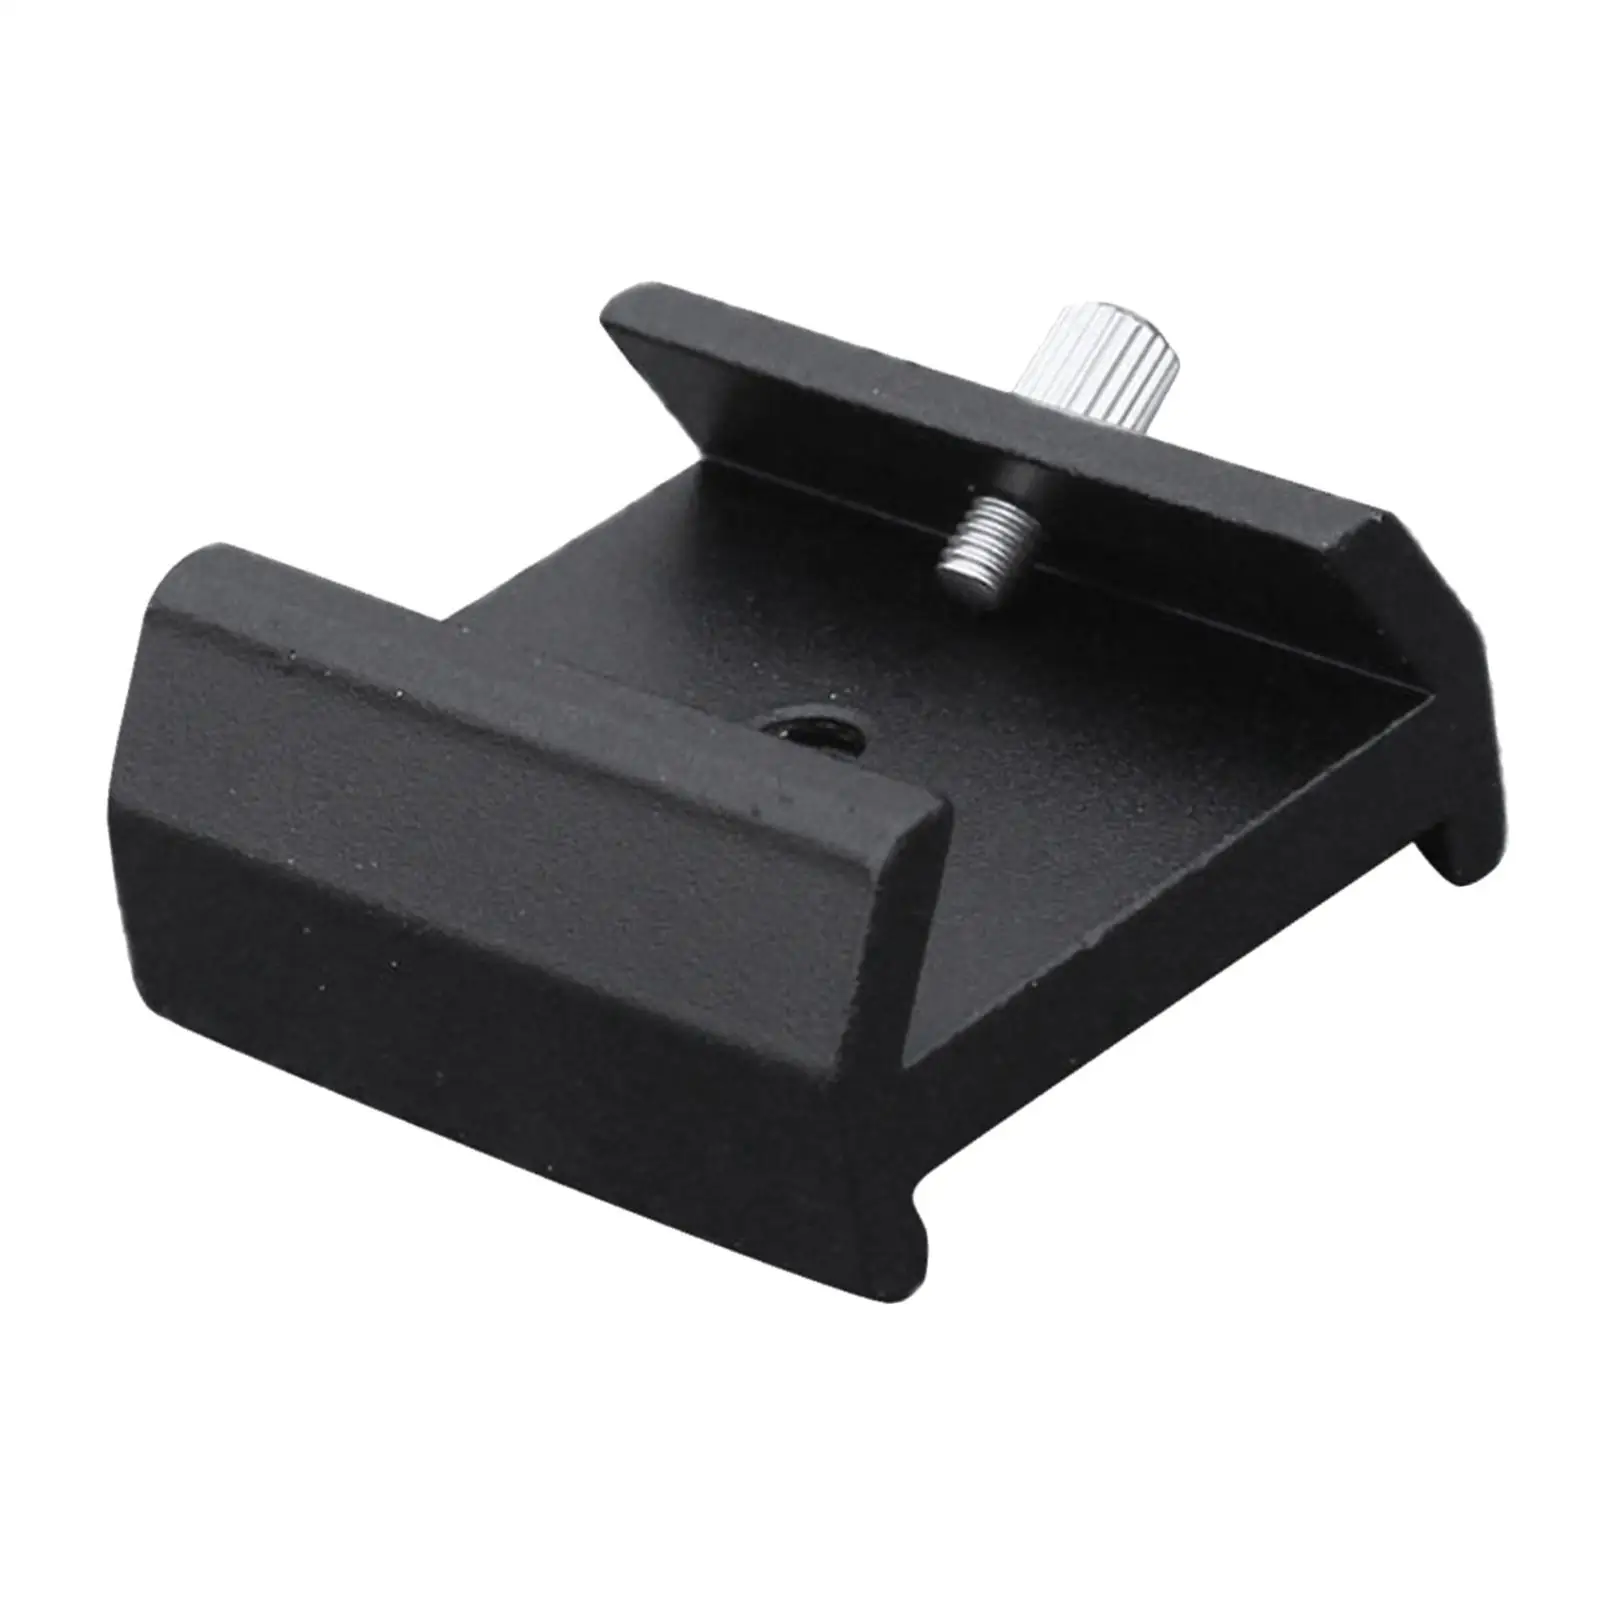 Astronomical Telescope Universal Dovetail for Guide Scope Adapter Astronomical Telescope Accessories